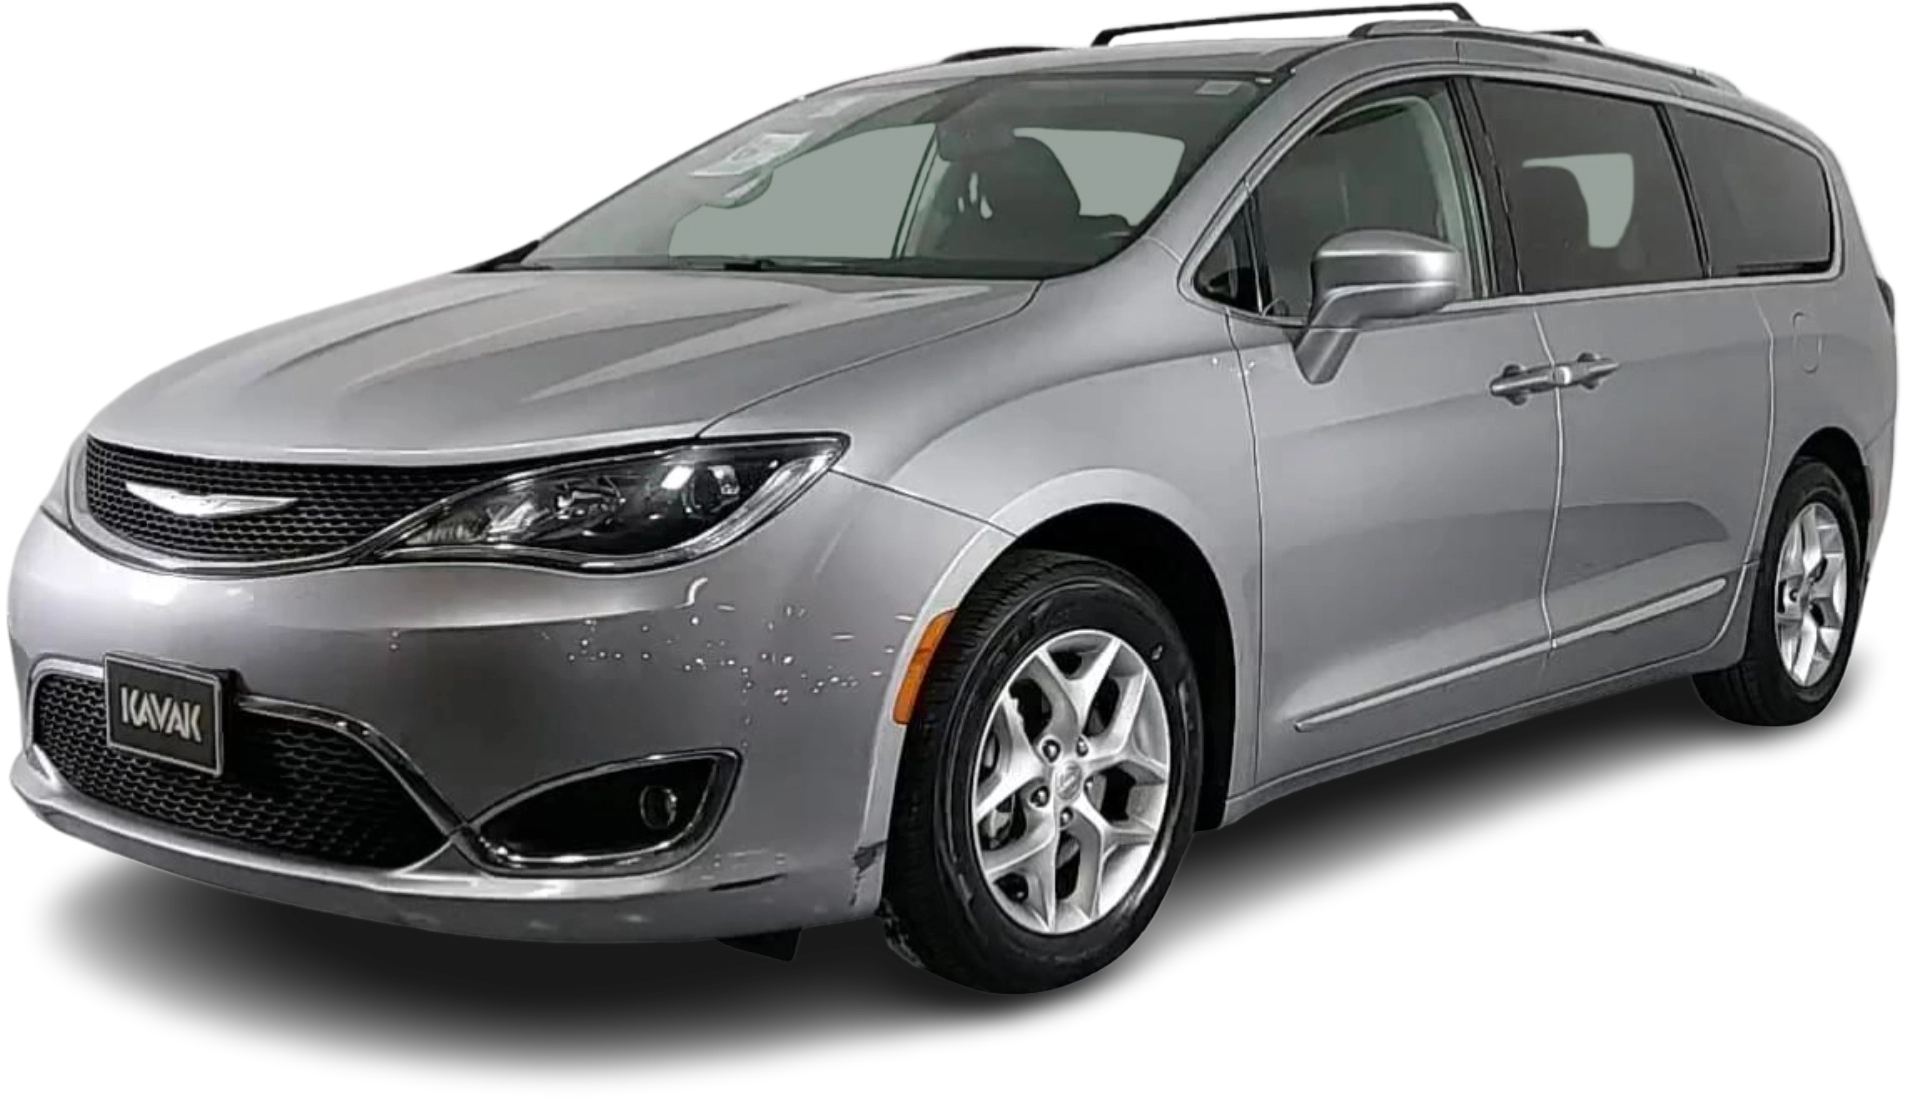 Chrysler Pacifica SUV 2022 2021 2020 2019 2018 2017